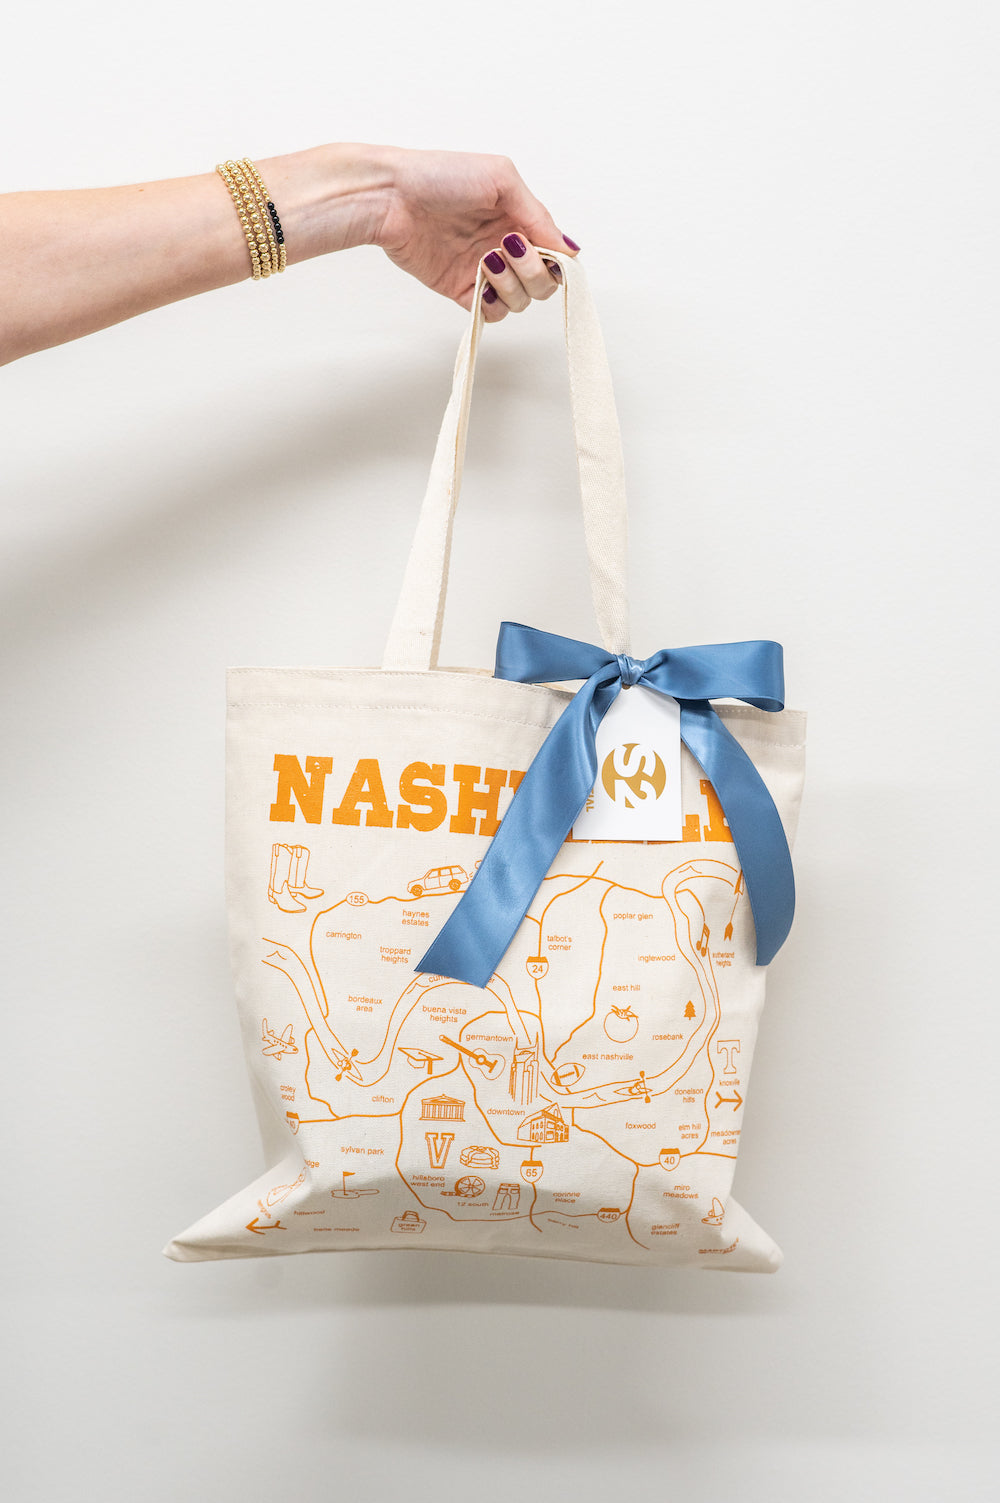 Nashville-Themed Welcome Tote Bags, Corporate Event curated by Marigold & Grey